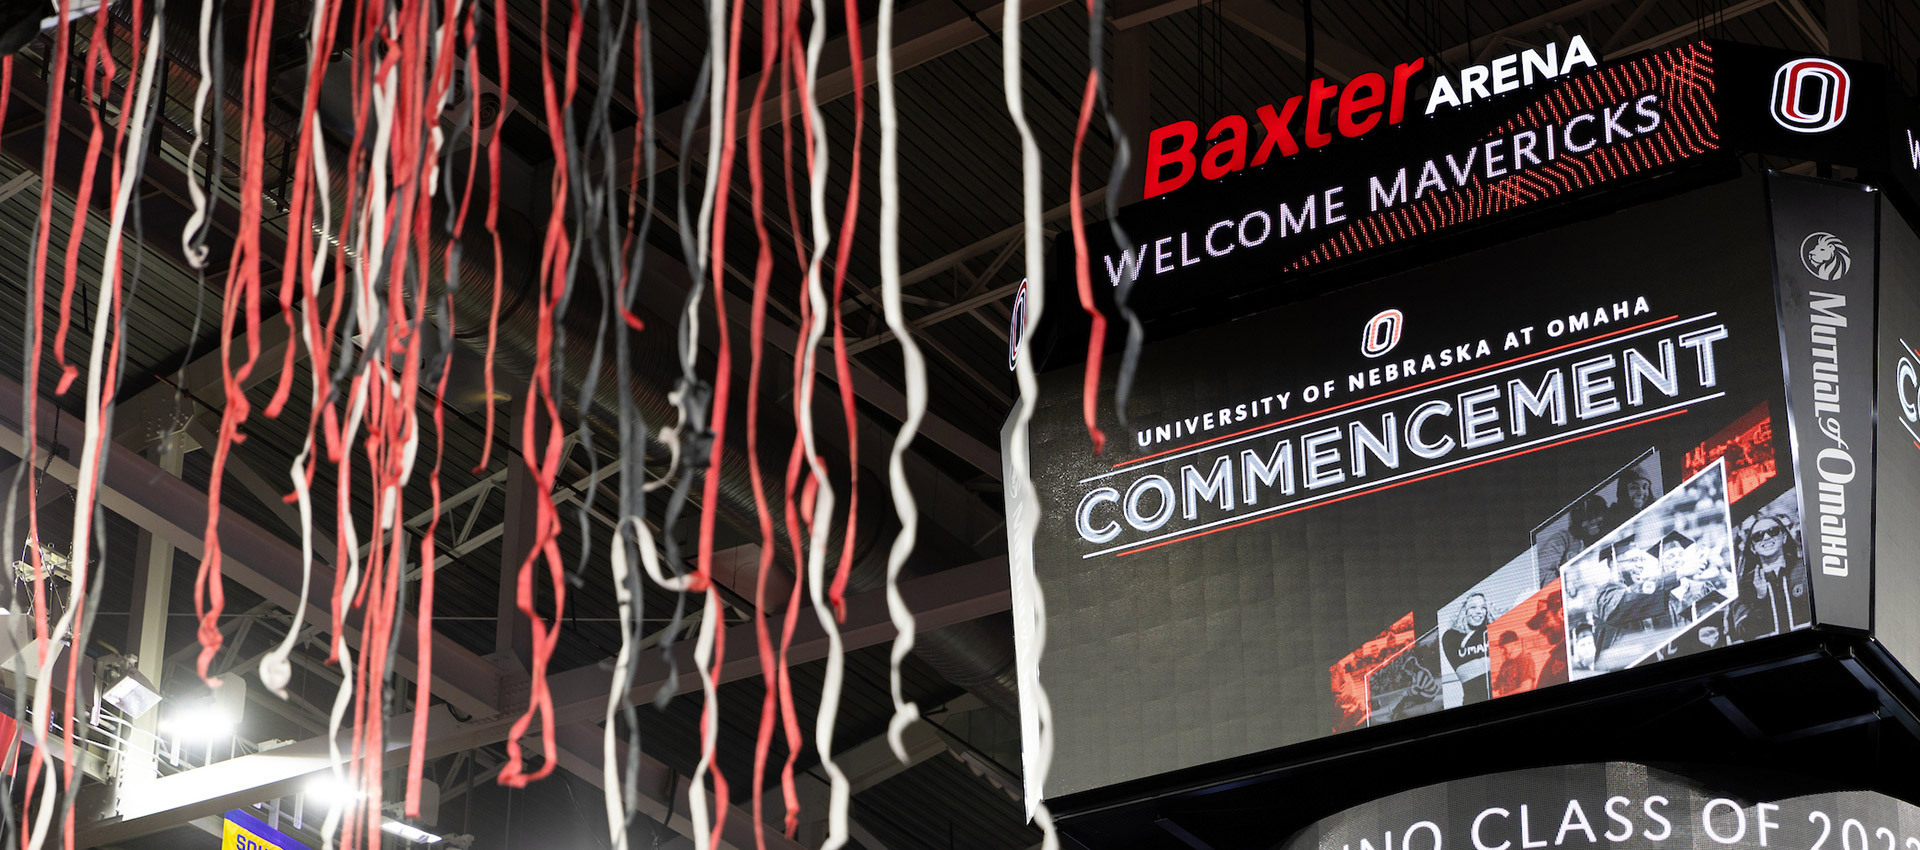 streamers filling the air at baxter arena